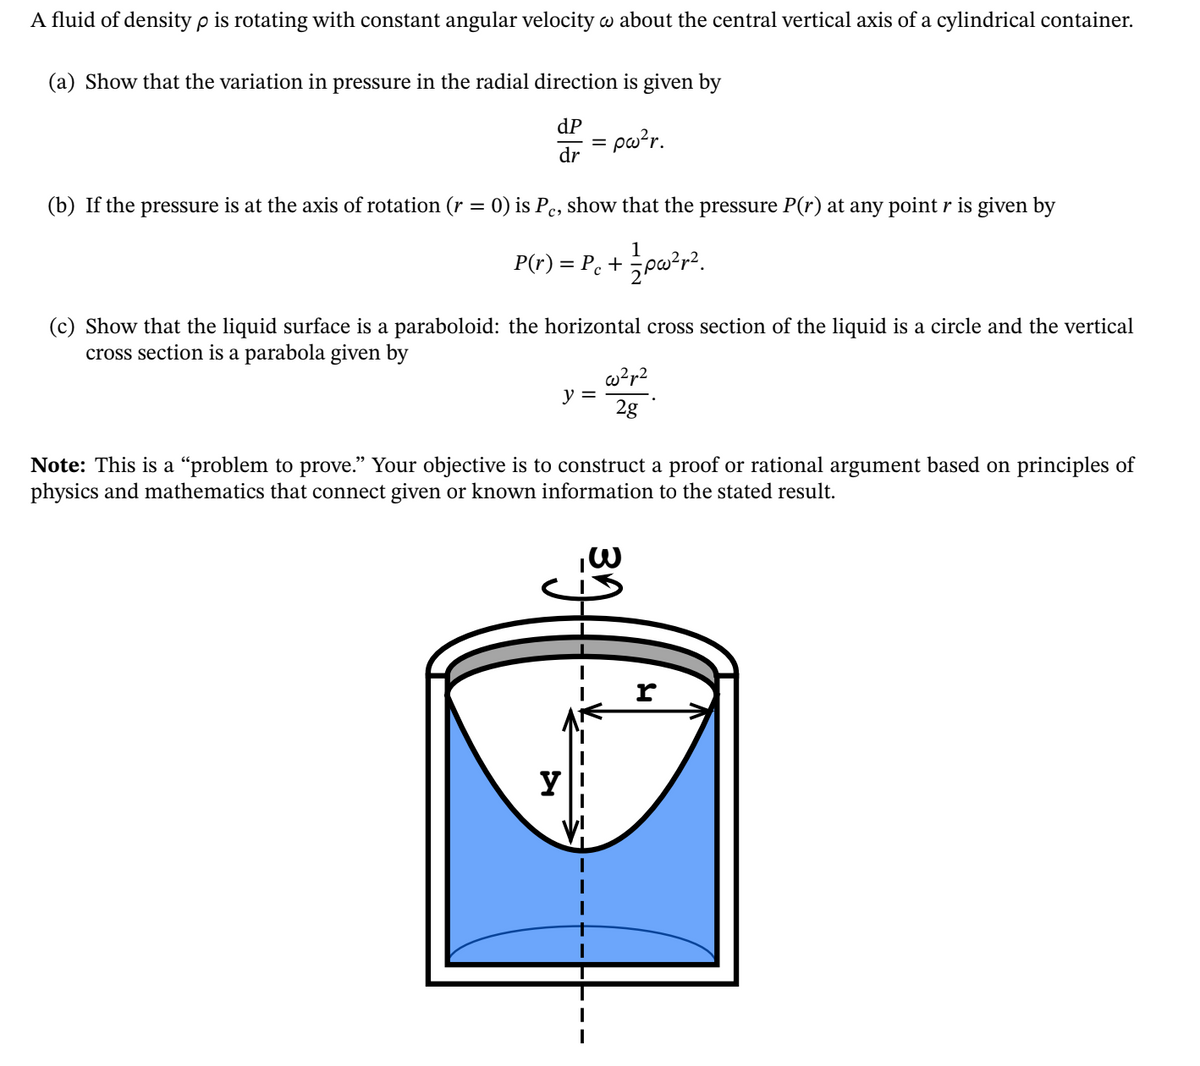 A fluid of density p is rotating with constant angular velocity w about the central vertical axis of a cylindrical container.
(a) Show that the variation in pressure in the radial direction is given by
dP
= pwr.
dr
(b) If the pressure is at the axis of rotation (r = 0) is Pc, show that the pressure P(r) at any point r is given by
1
P(r) = P. + pw²r?.
(c) Show that the liquid surface is a paraboloid: the horizontal cross section of the liquid is a circle and the vertical
cross section is a parabola given by
w?r2
y =
2g
Note: This is a “problem to prove." Your objective is to construct a proof or rational argument based on principles of
physics and mathematics that connect given or known information to the stated result.
r
